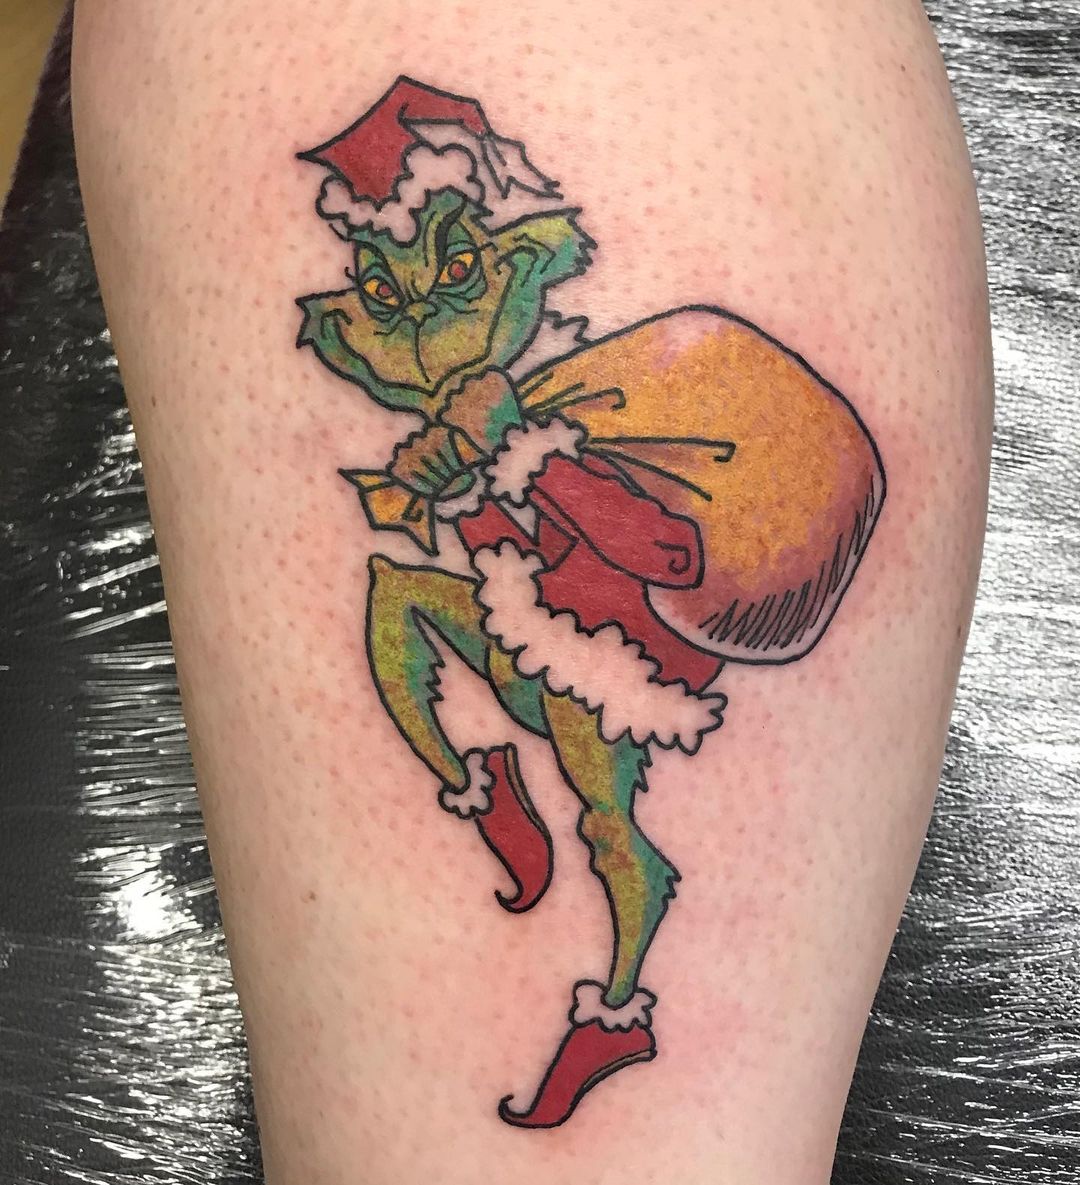 25 delightful dr. suess tattoos that bring the nostalgia